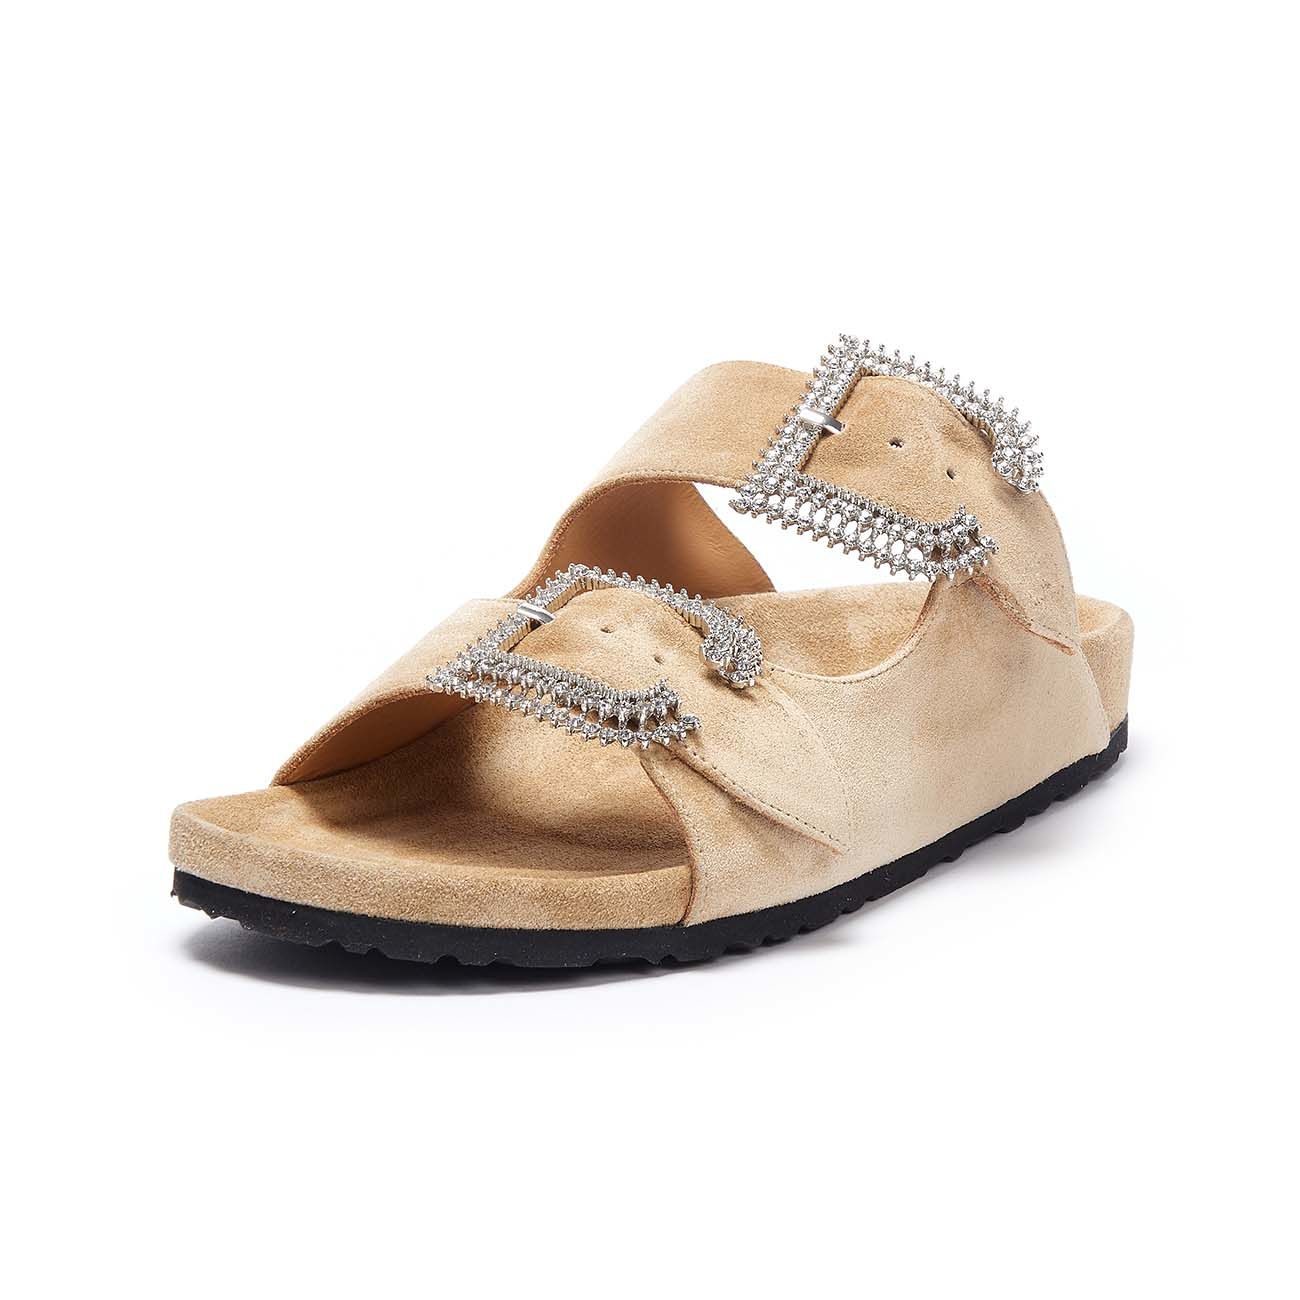 ANNA F. SUEDE SANDALS WITH JEWEL BUCKLES Woman Sand